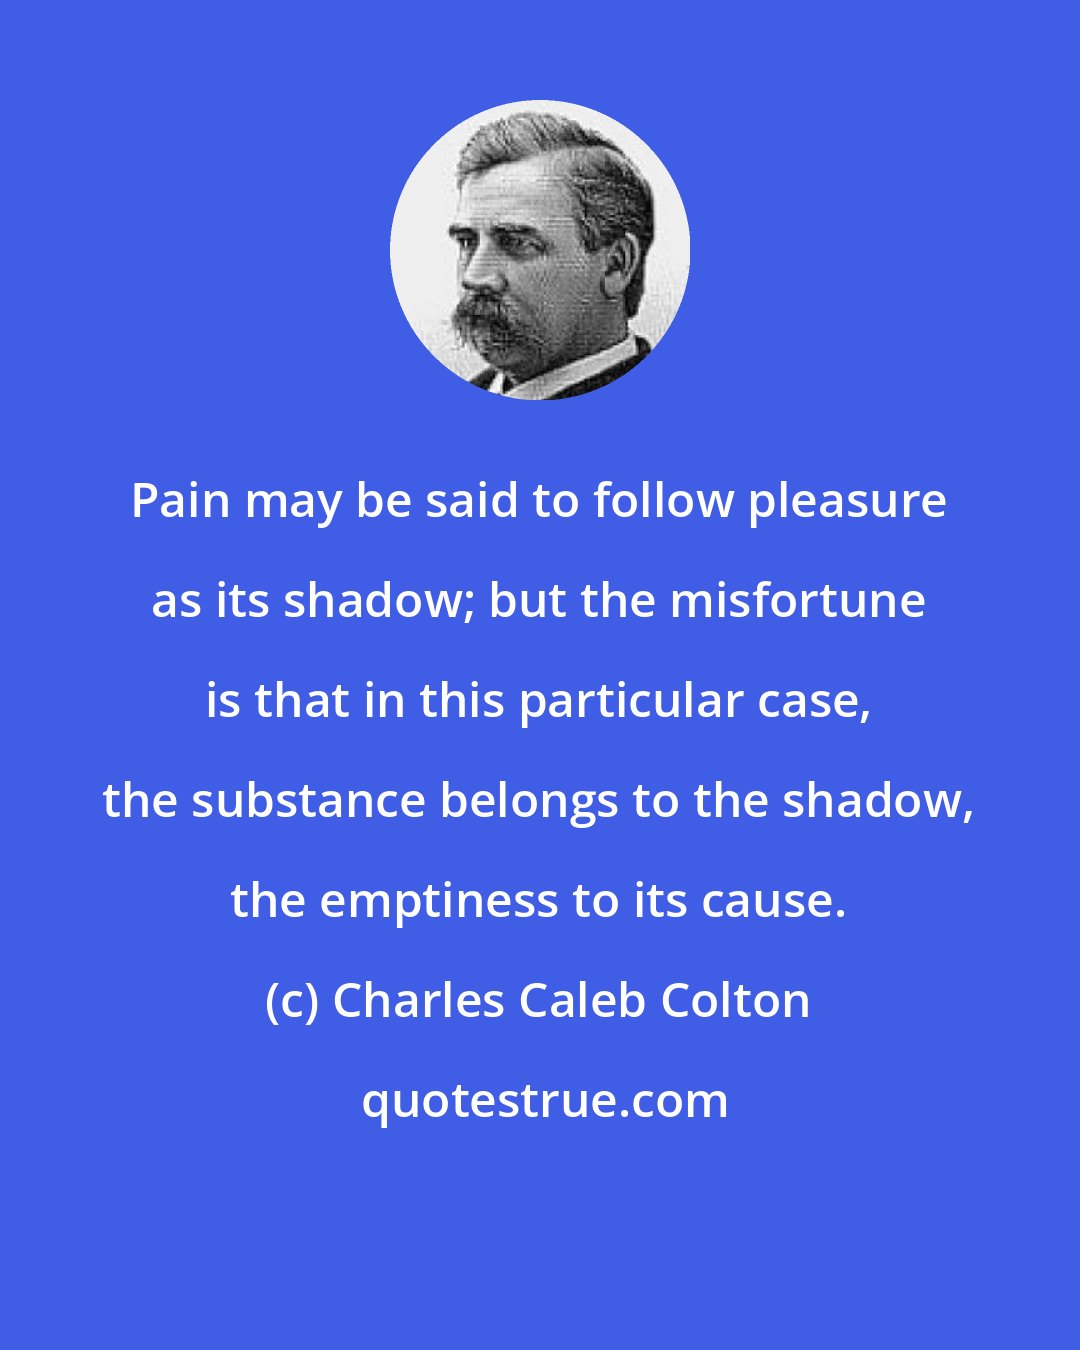 Charles Caleb Colton: Pain may be said to follow pleasure as its shadow; but the misfortune is that in this particular case, the substance belongs to the shadow, the emptiness to its cause.